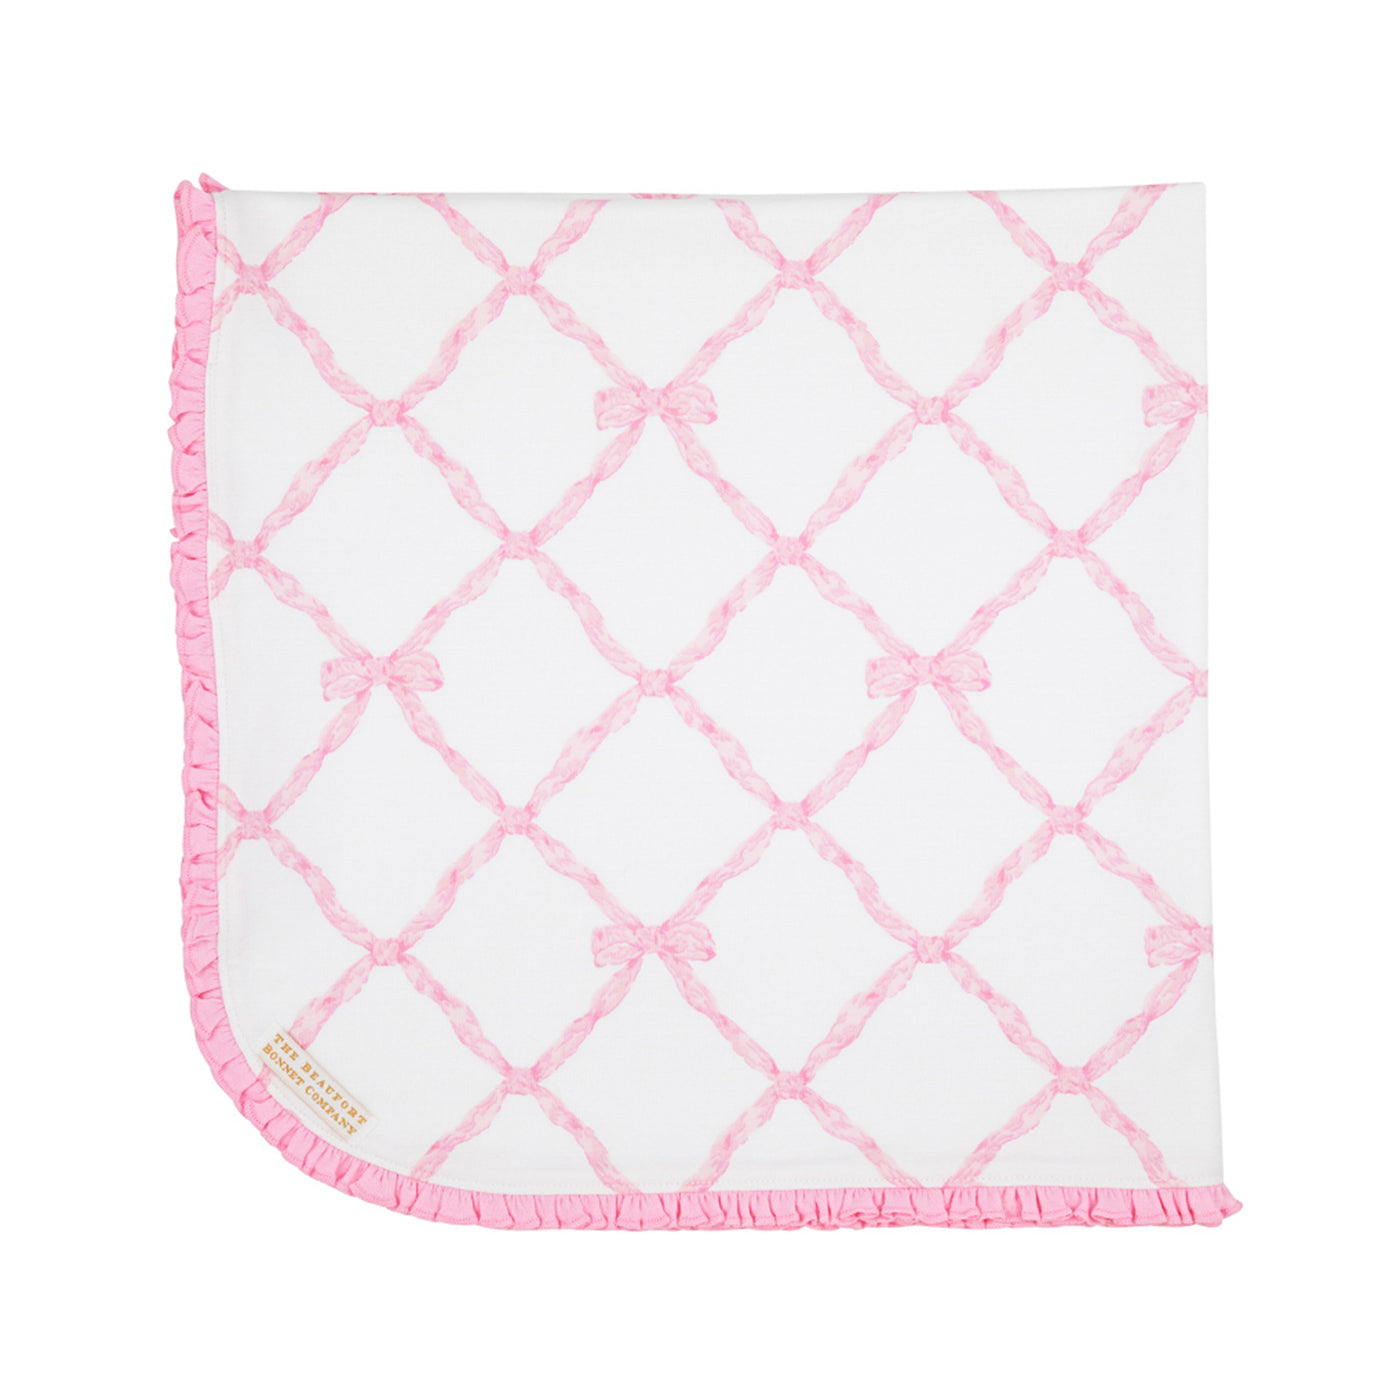 Baby Buggy Blanket - Belle Meade Bow